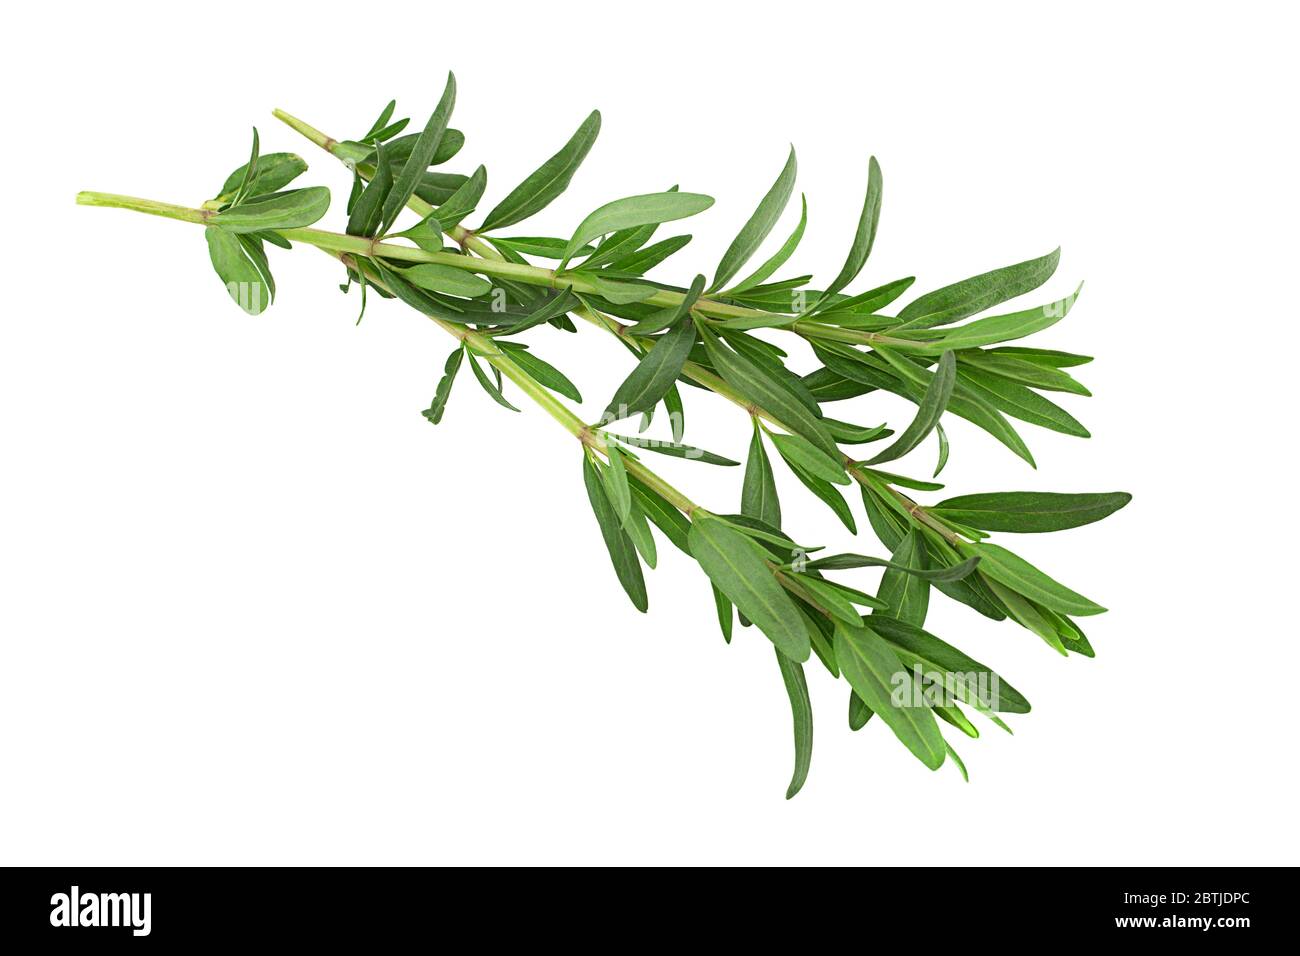 Tarragon leaf bunch closeup isolated on white background Stock Photo